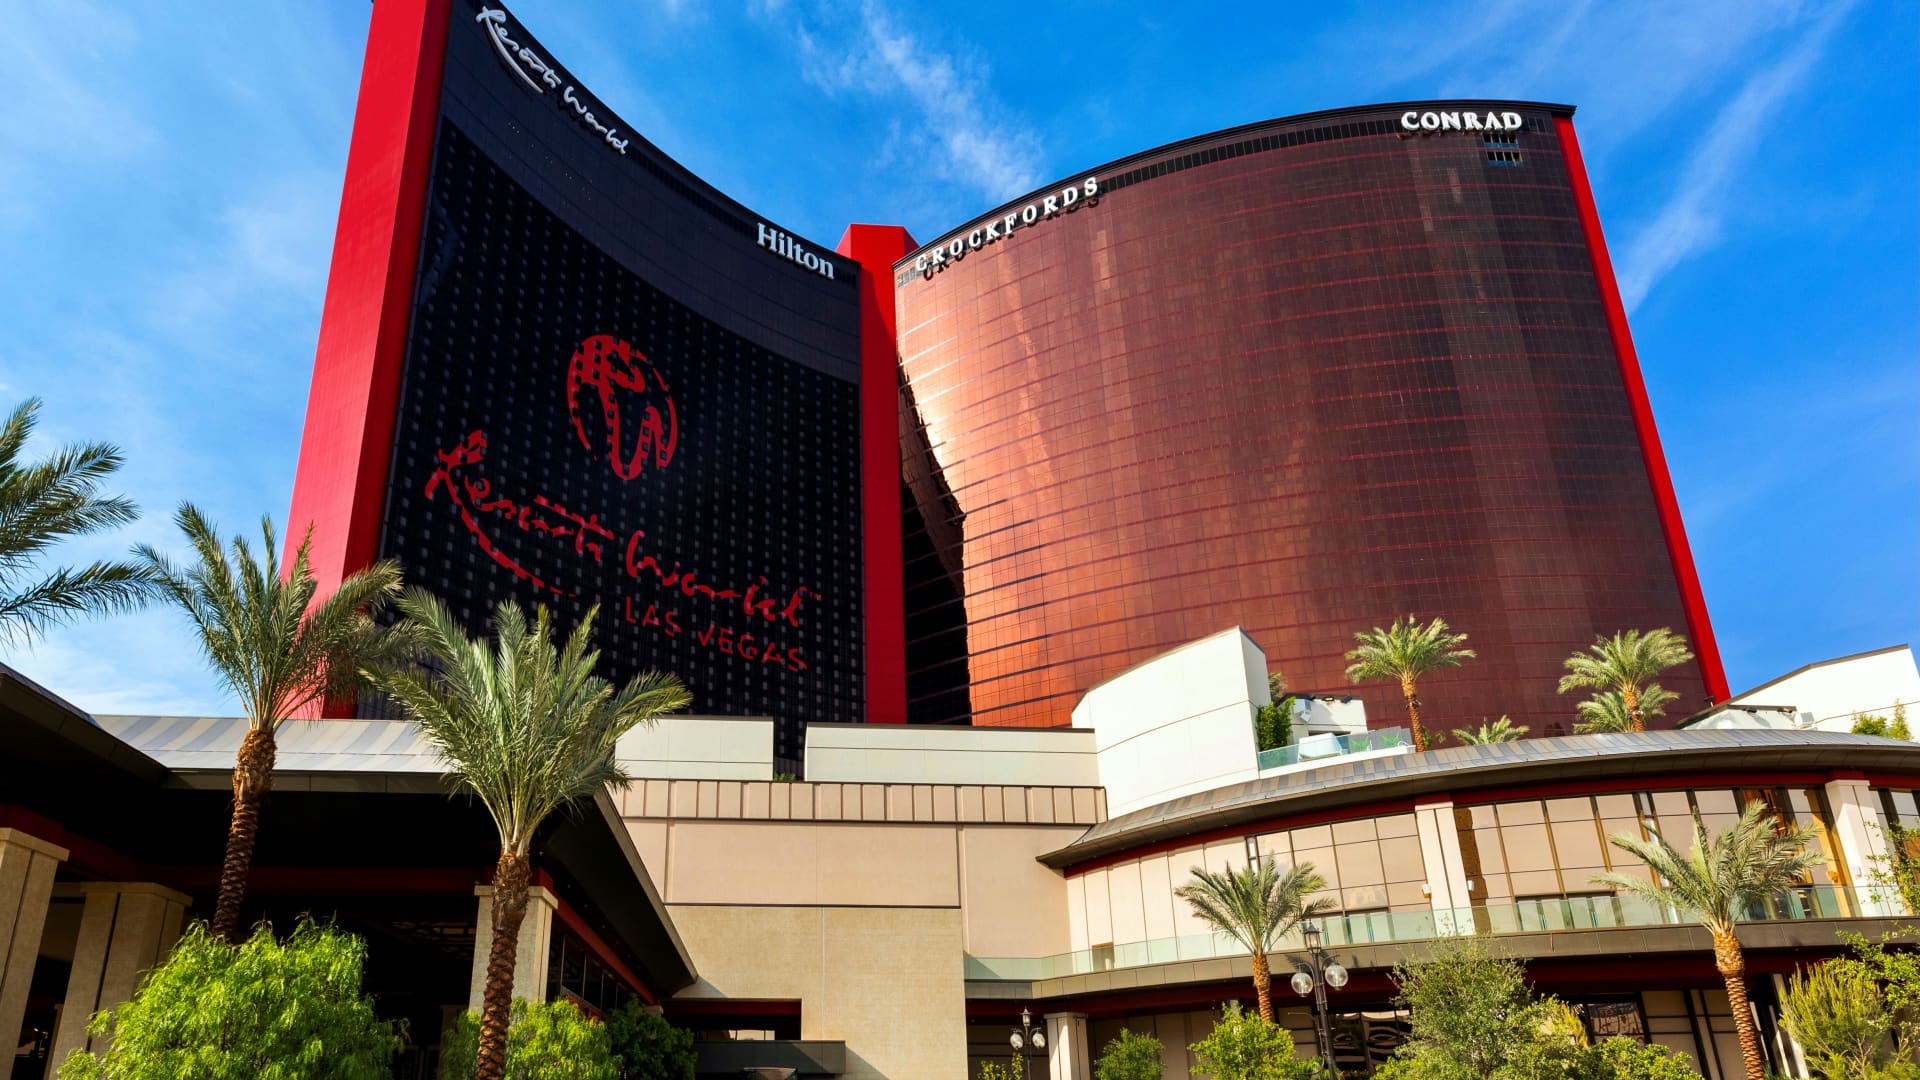 Resorts World is the first new resort on the Las Vegas Strip in over a decade.